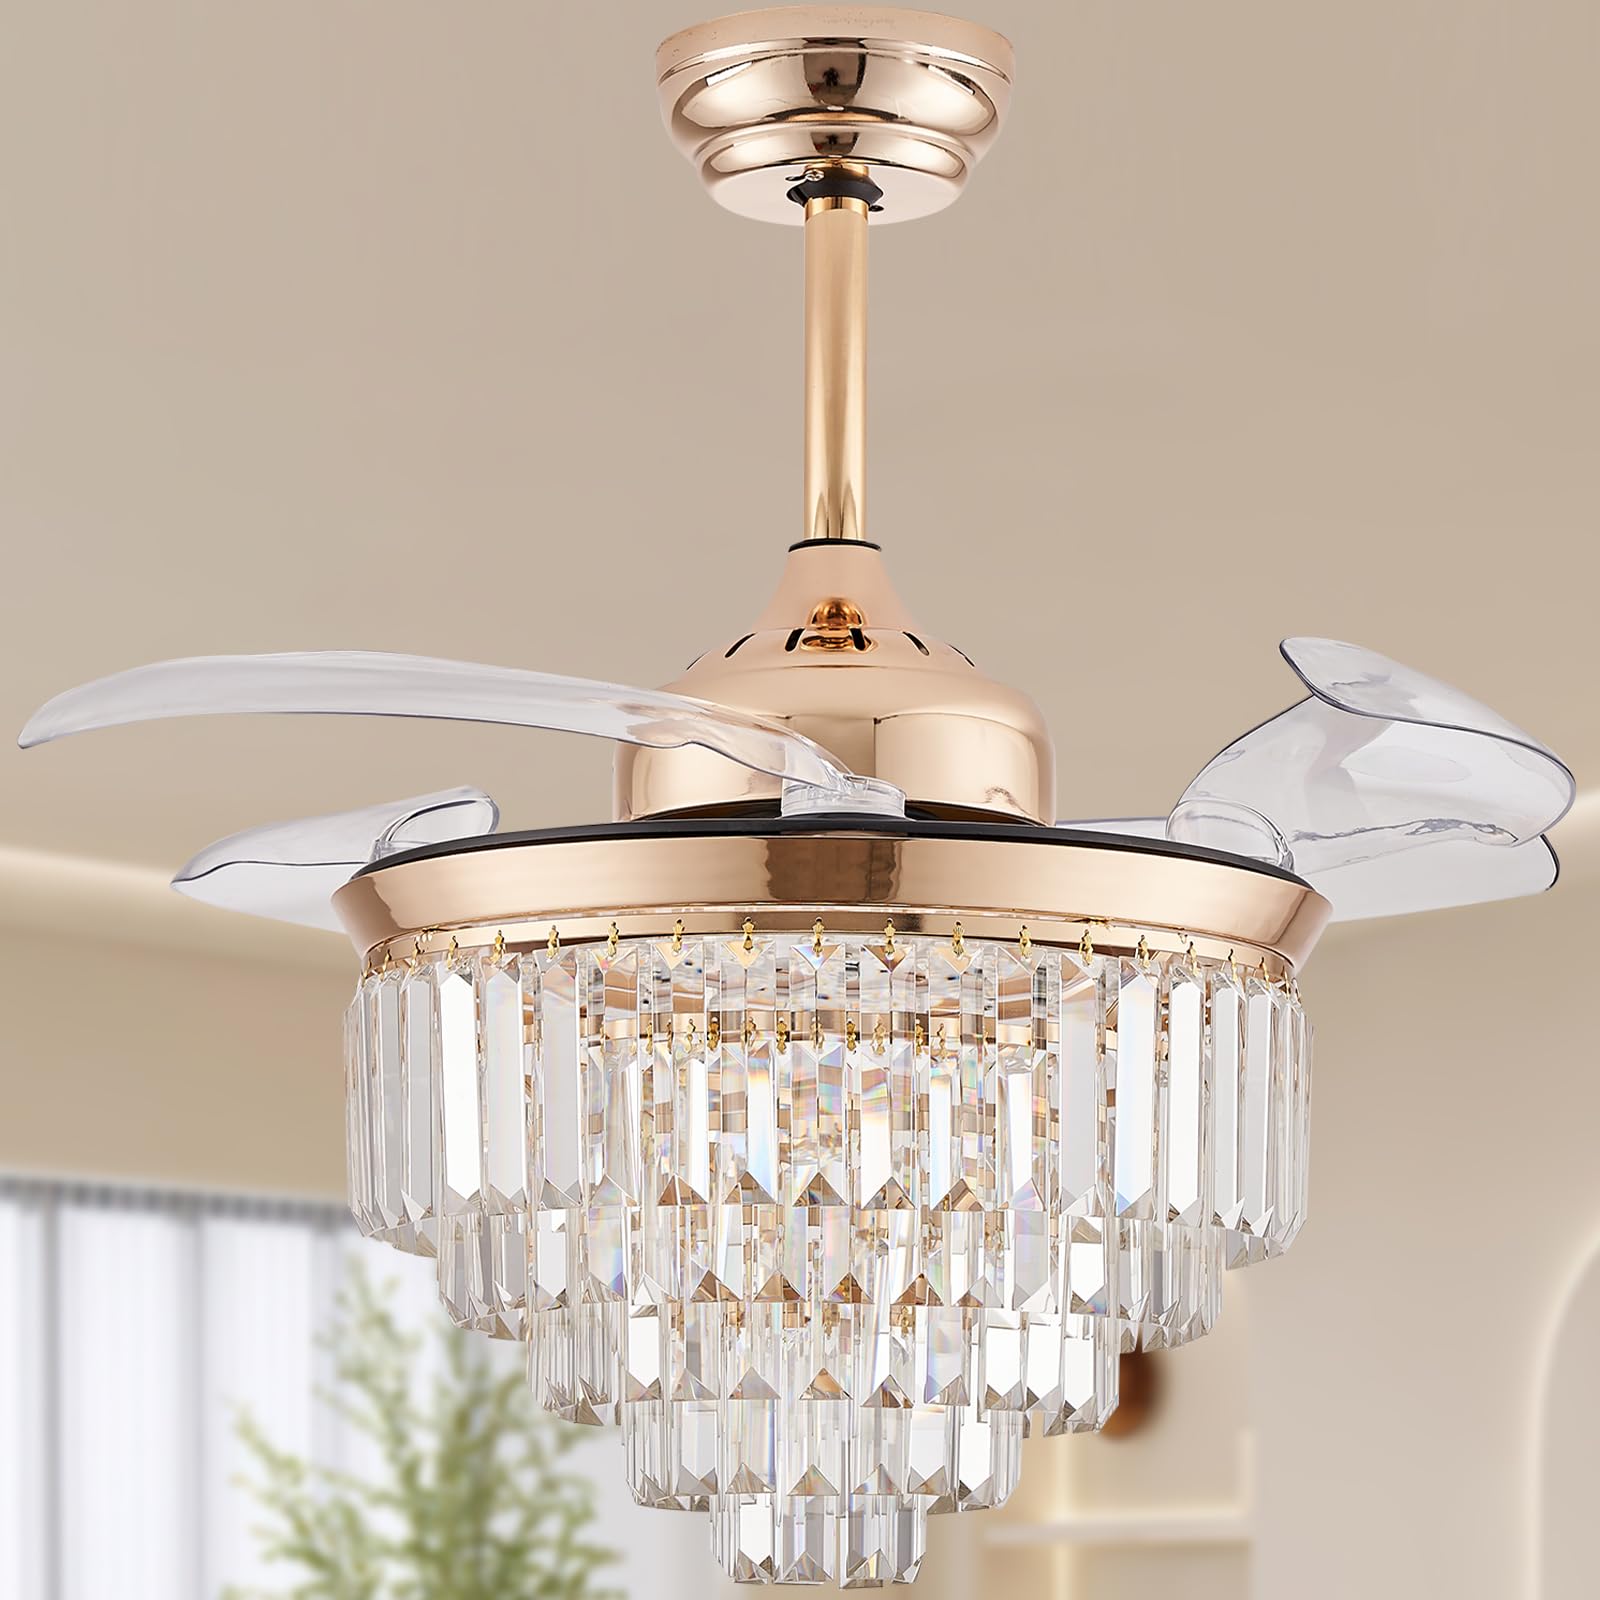 Finktonglan Dimmable Fandeliers Modern Crystal Chandelier Ceiling Fan with Lights 36” Retractable LED Invisible Fandelier Crystal Chandelier Fan for Bedroom Dining Room Living Room, Gold